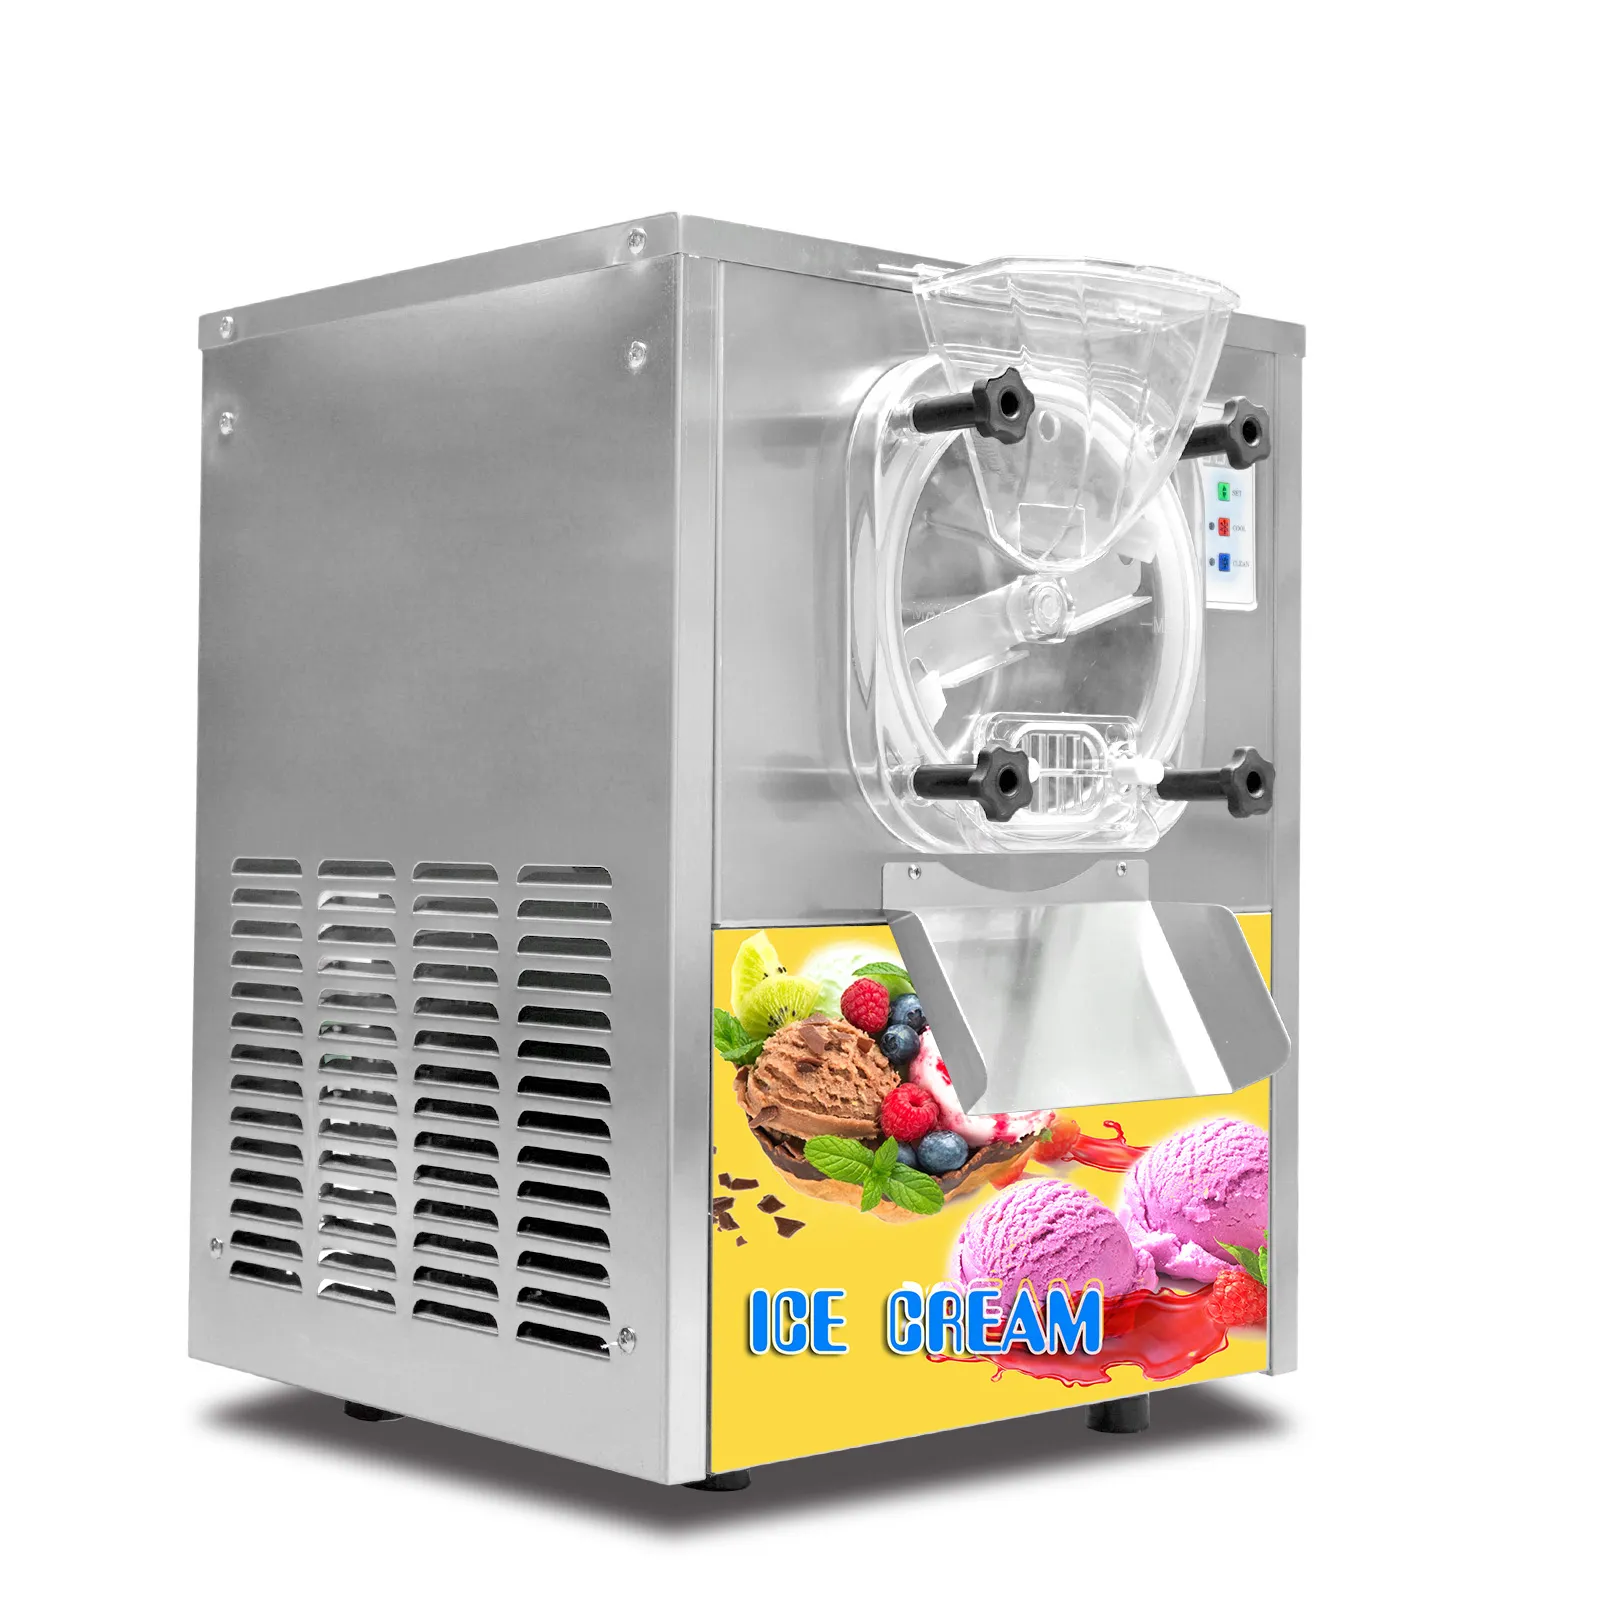 Free shipping to door Desktop kitchen gelato Hard ice cream machine for commercial and home use